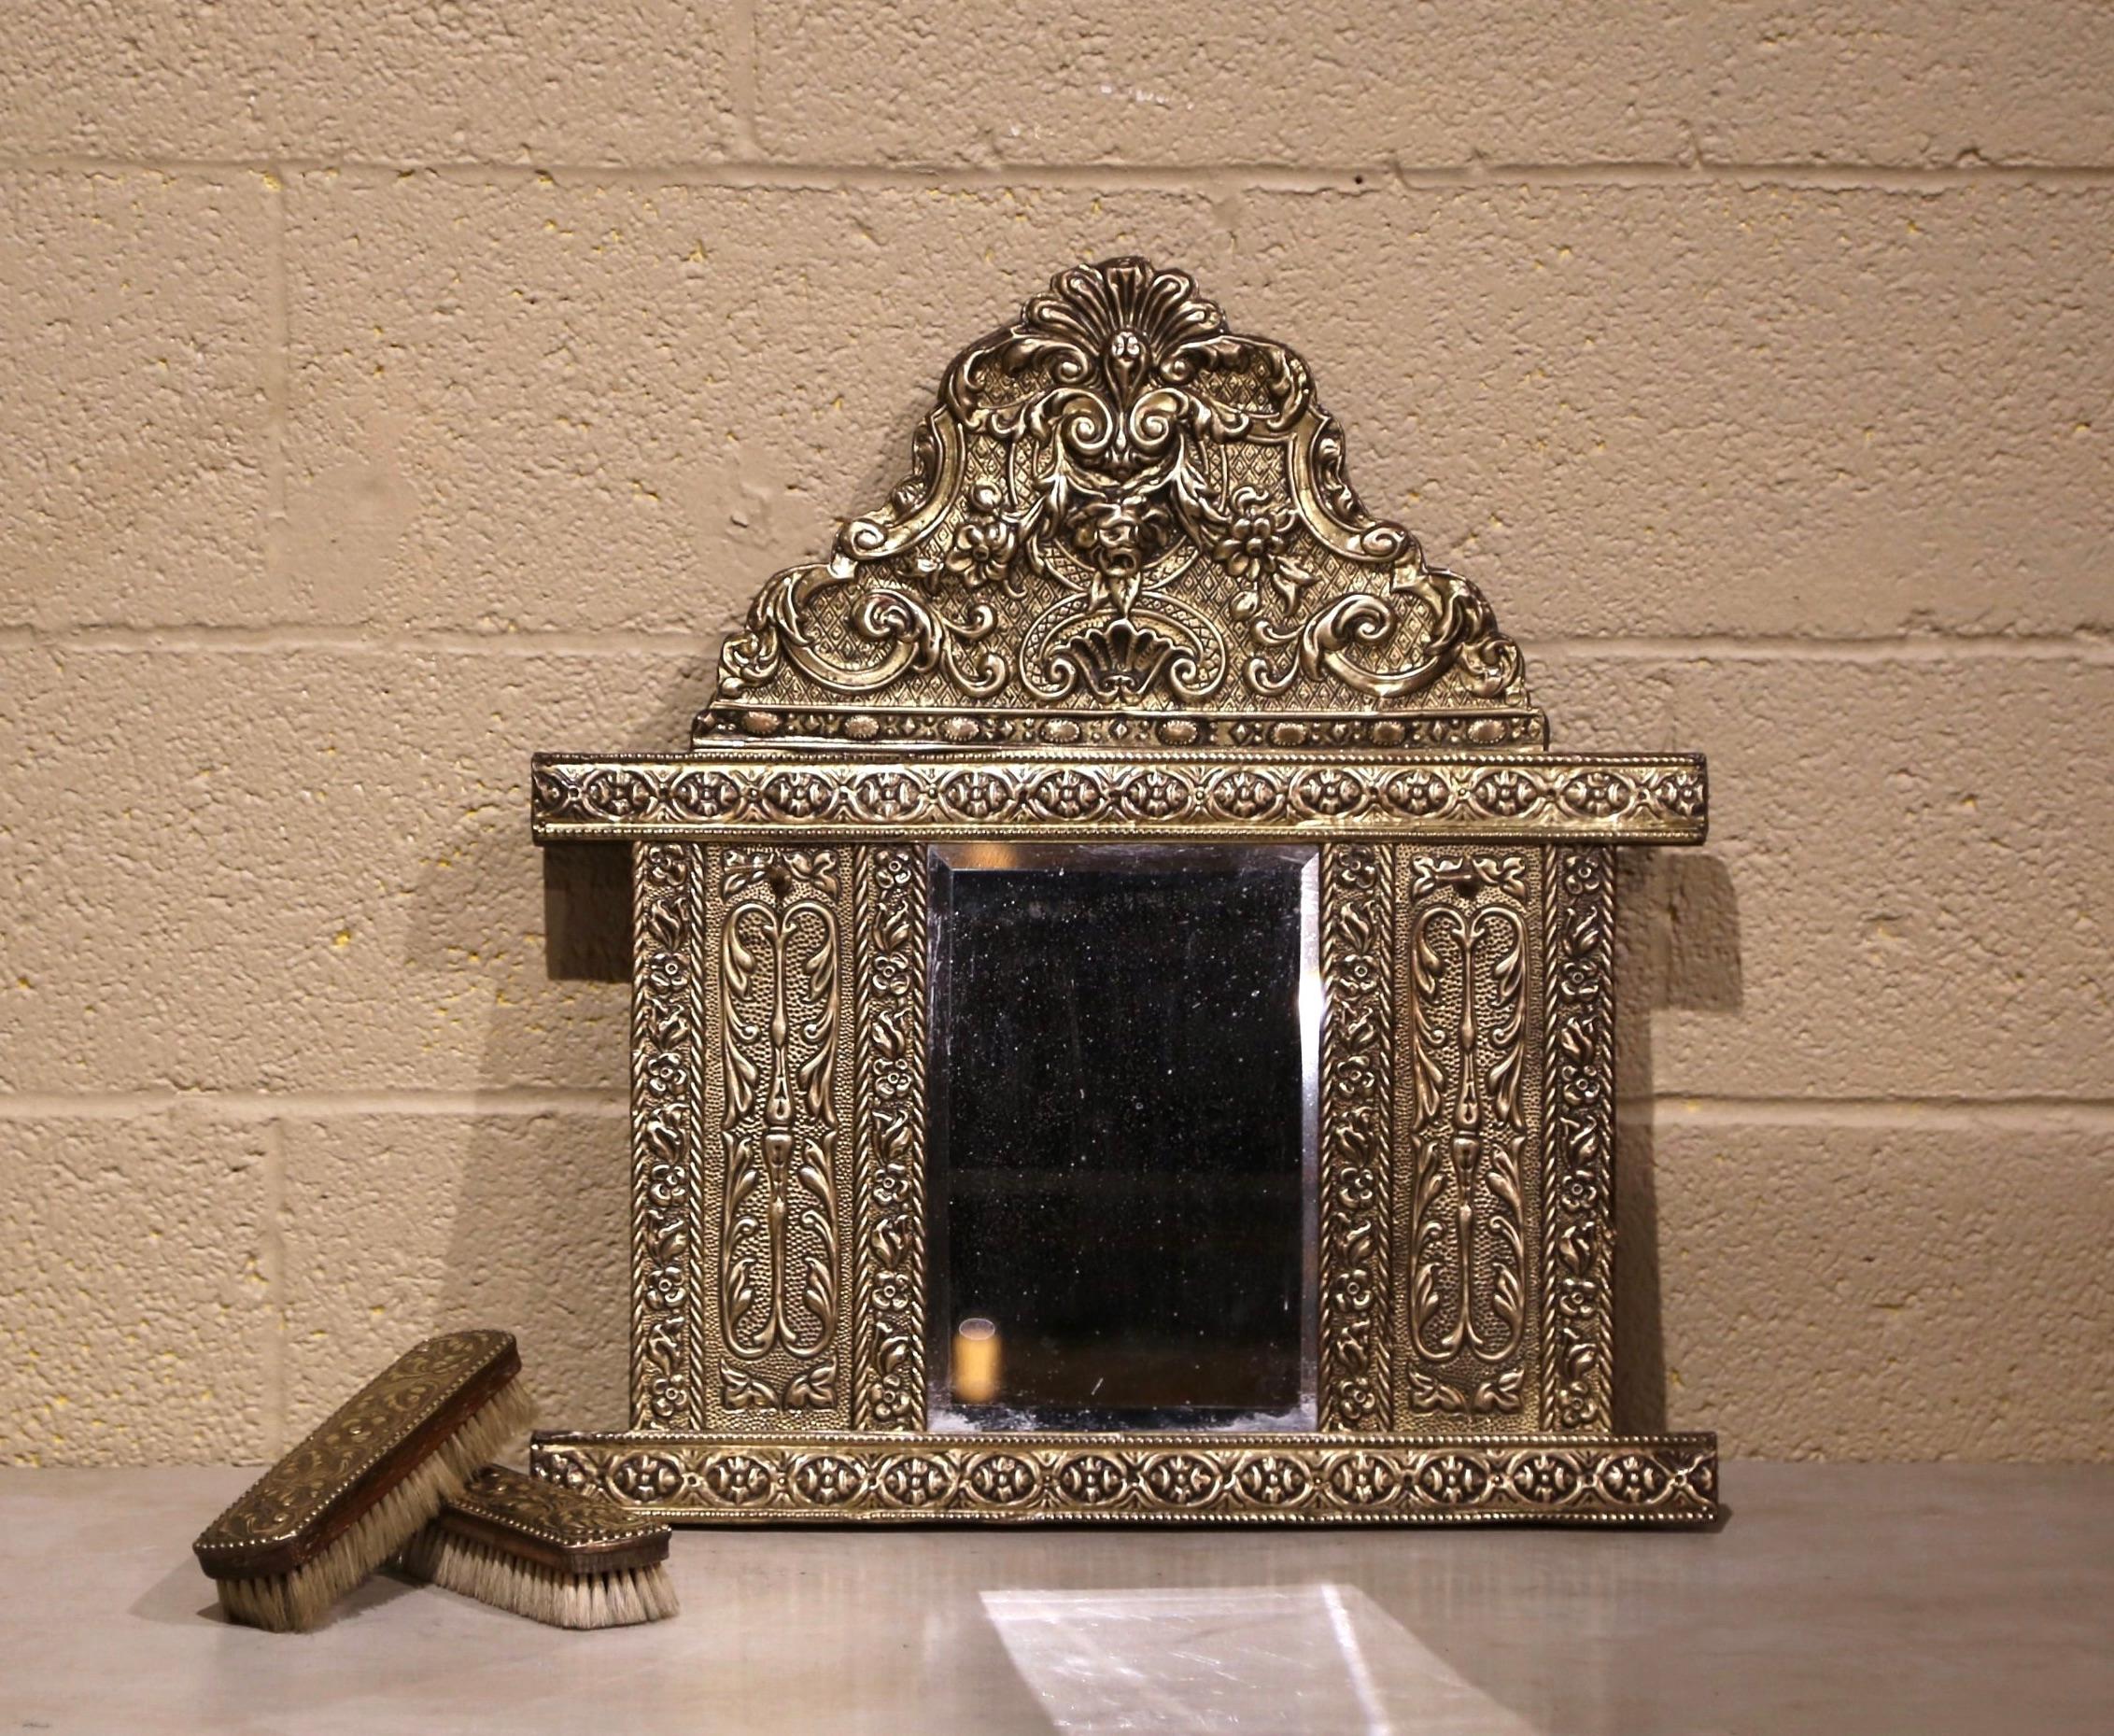 Created in France, circa 1870, the petite antique wall mirror is decorated with intricate repousse motifs including a cartouche with shell decor at the pediment. The mirror features the original beveled mercury glass with brushes on each side. Both